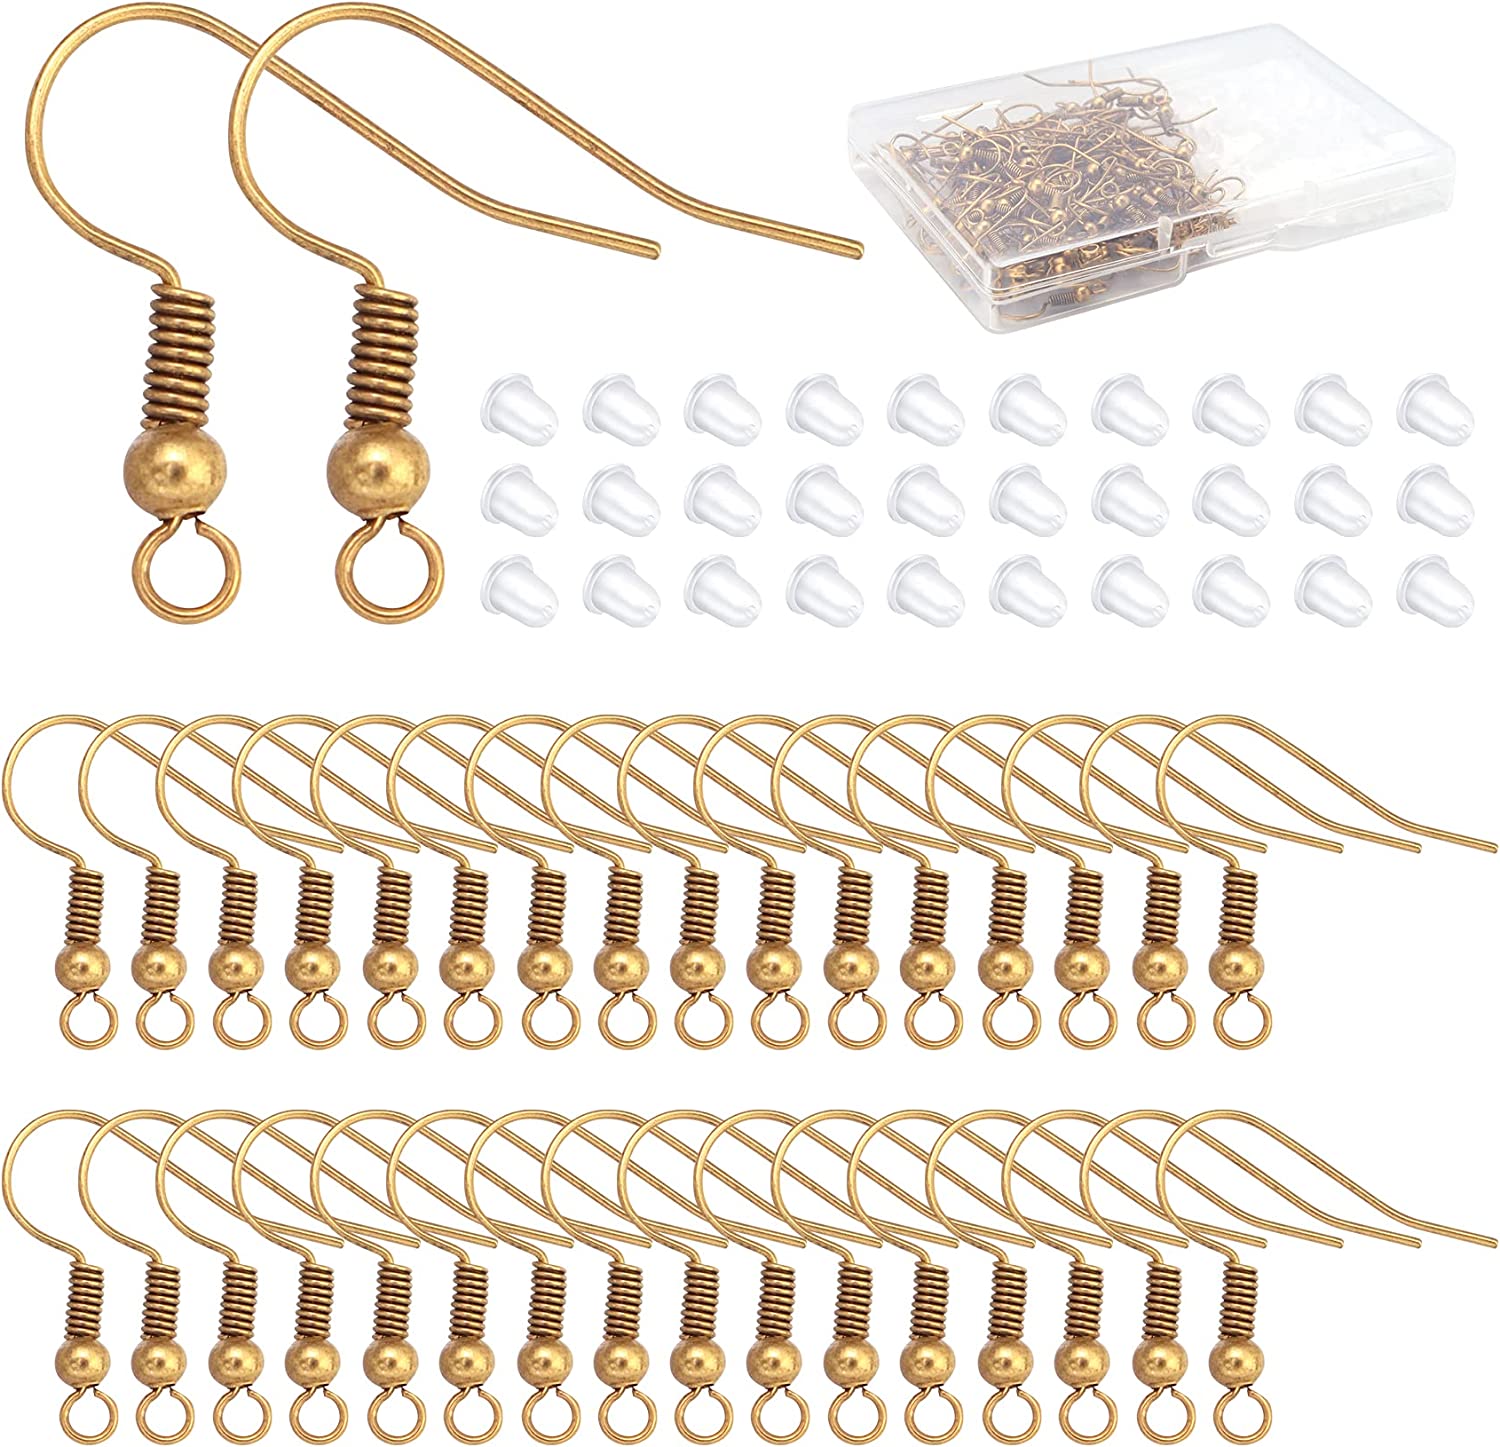 Southwit 200 PCS Earring Hooks for Jewelry Making with Earring